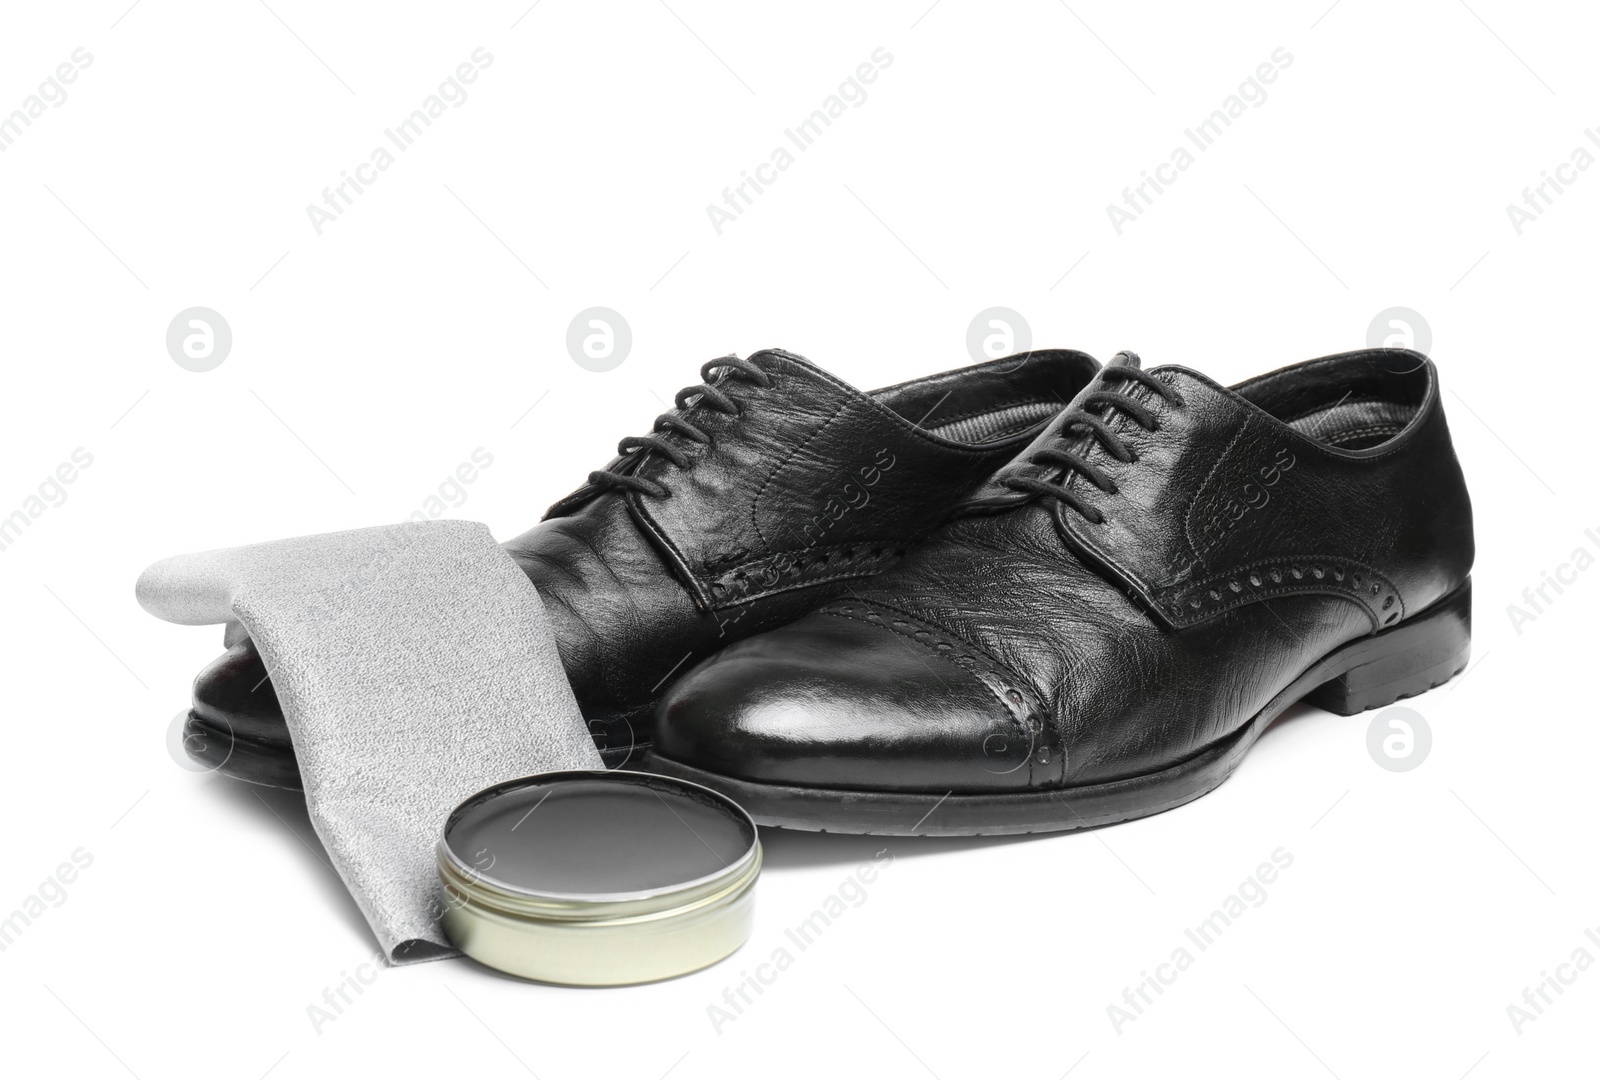 Photo of Stylish men's footwear and shoe care accessories on white background